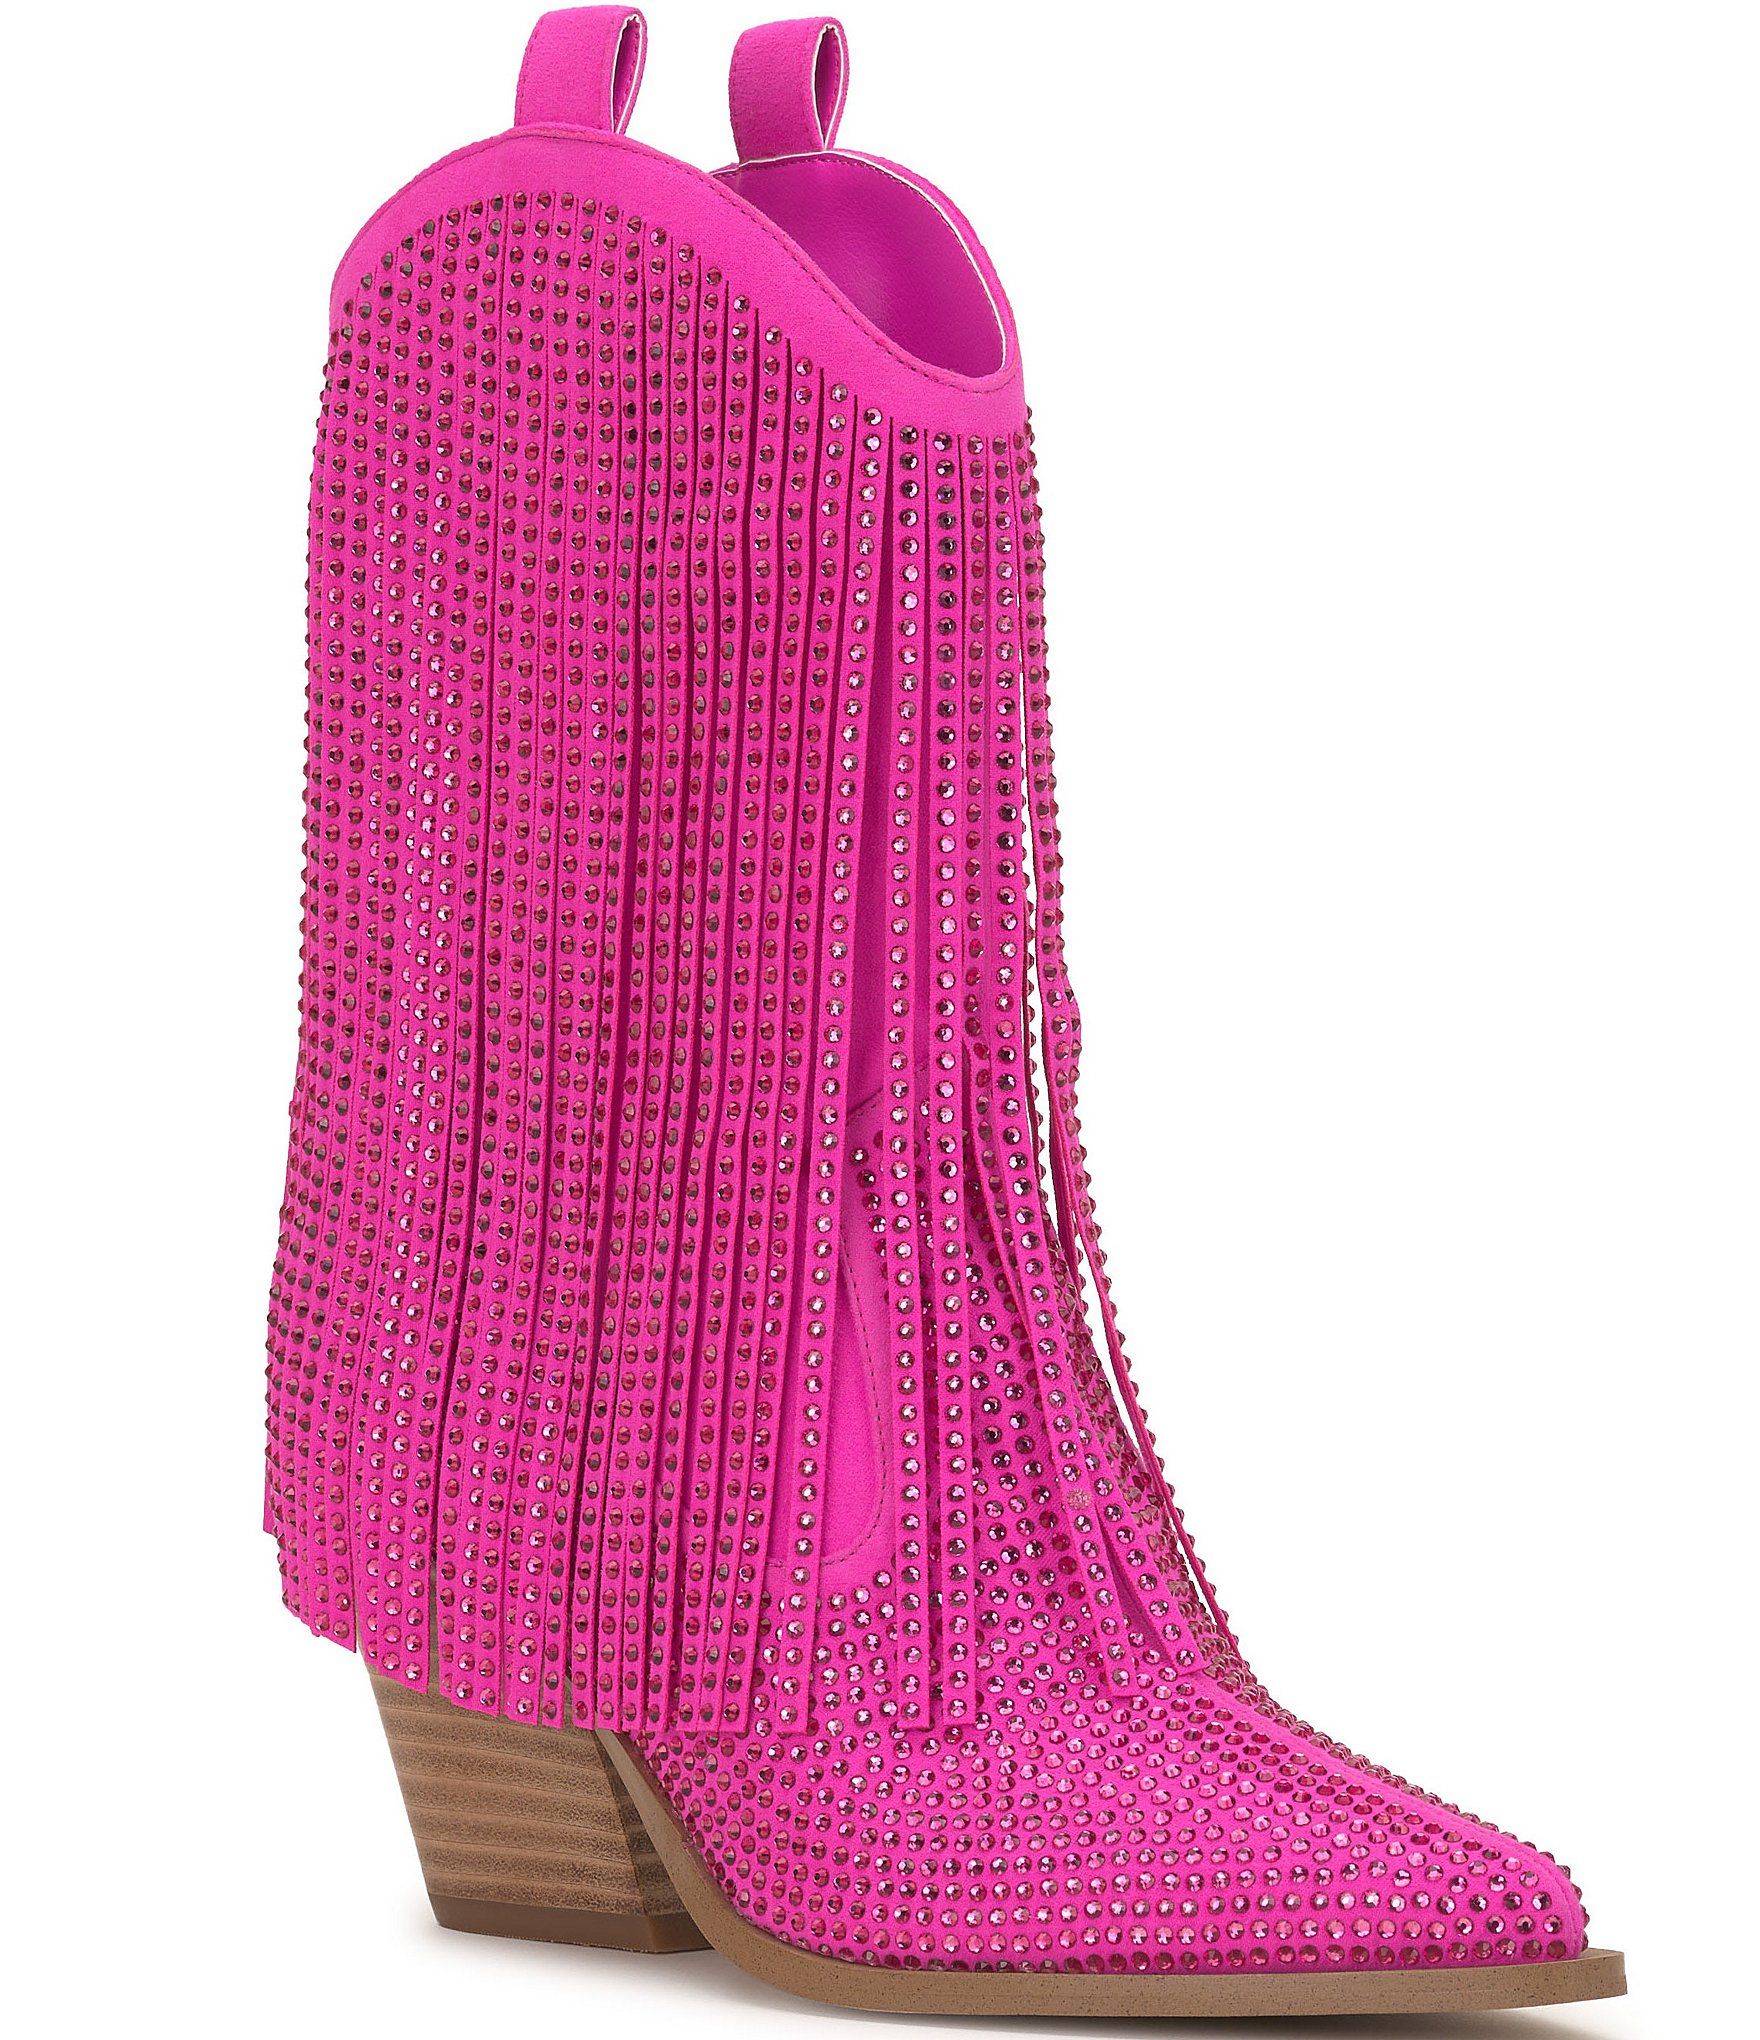 Jessica Simpson boots for women